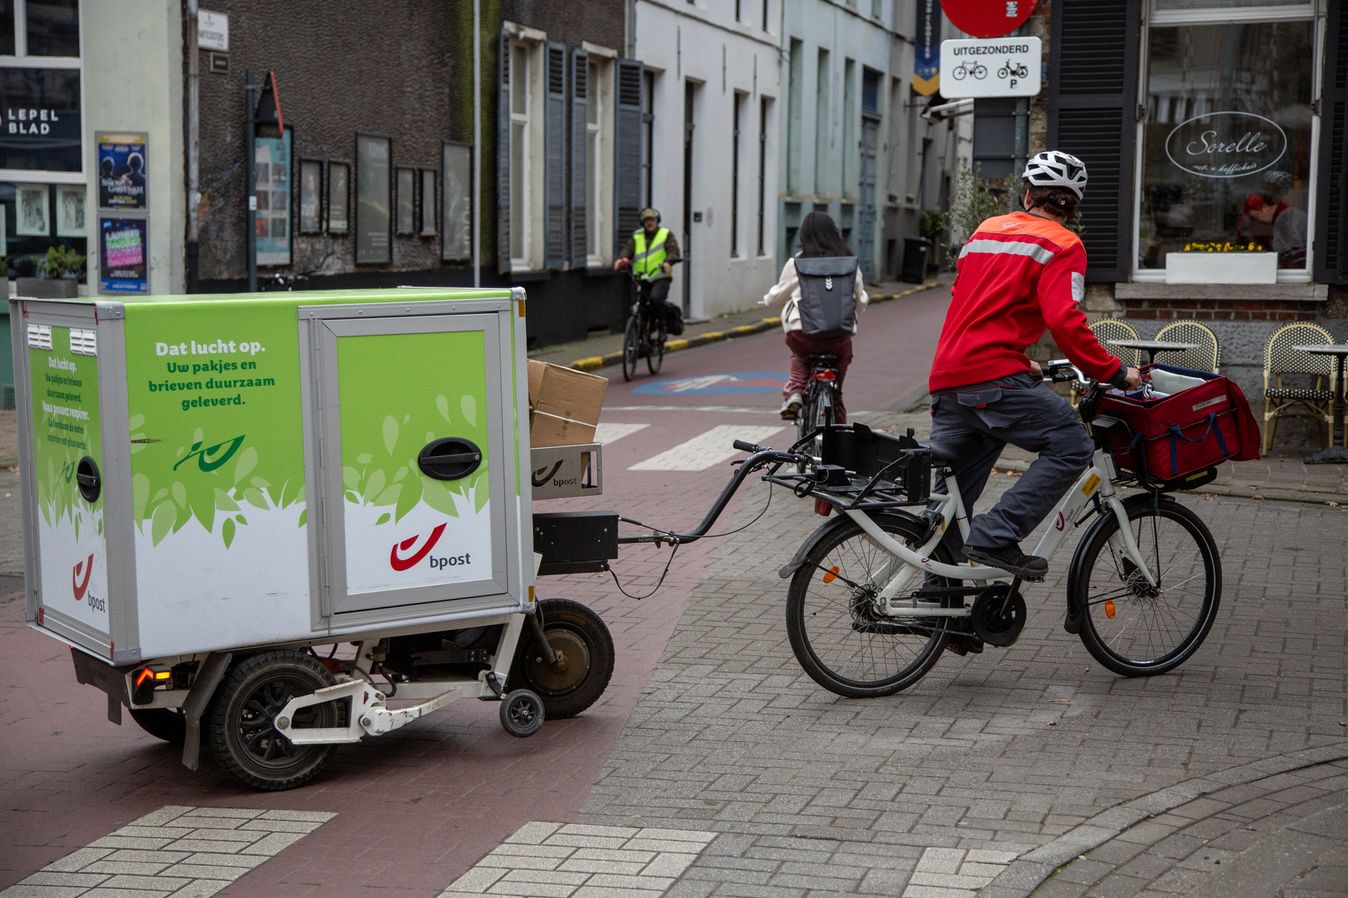 A postal worker tows an electrically assisted trailer through Gent